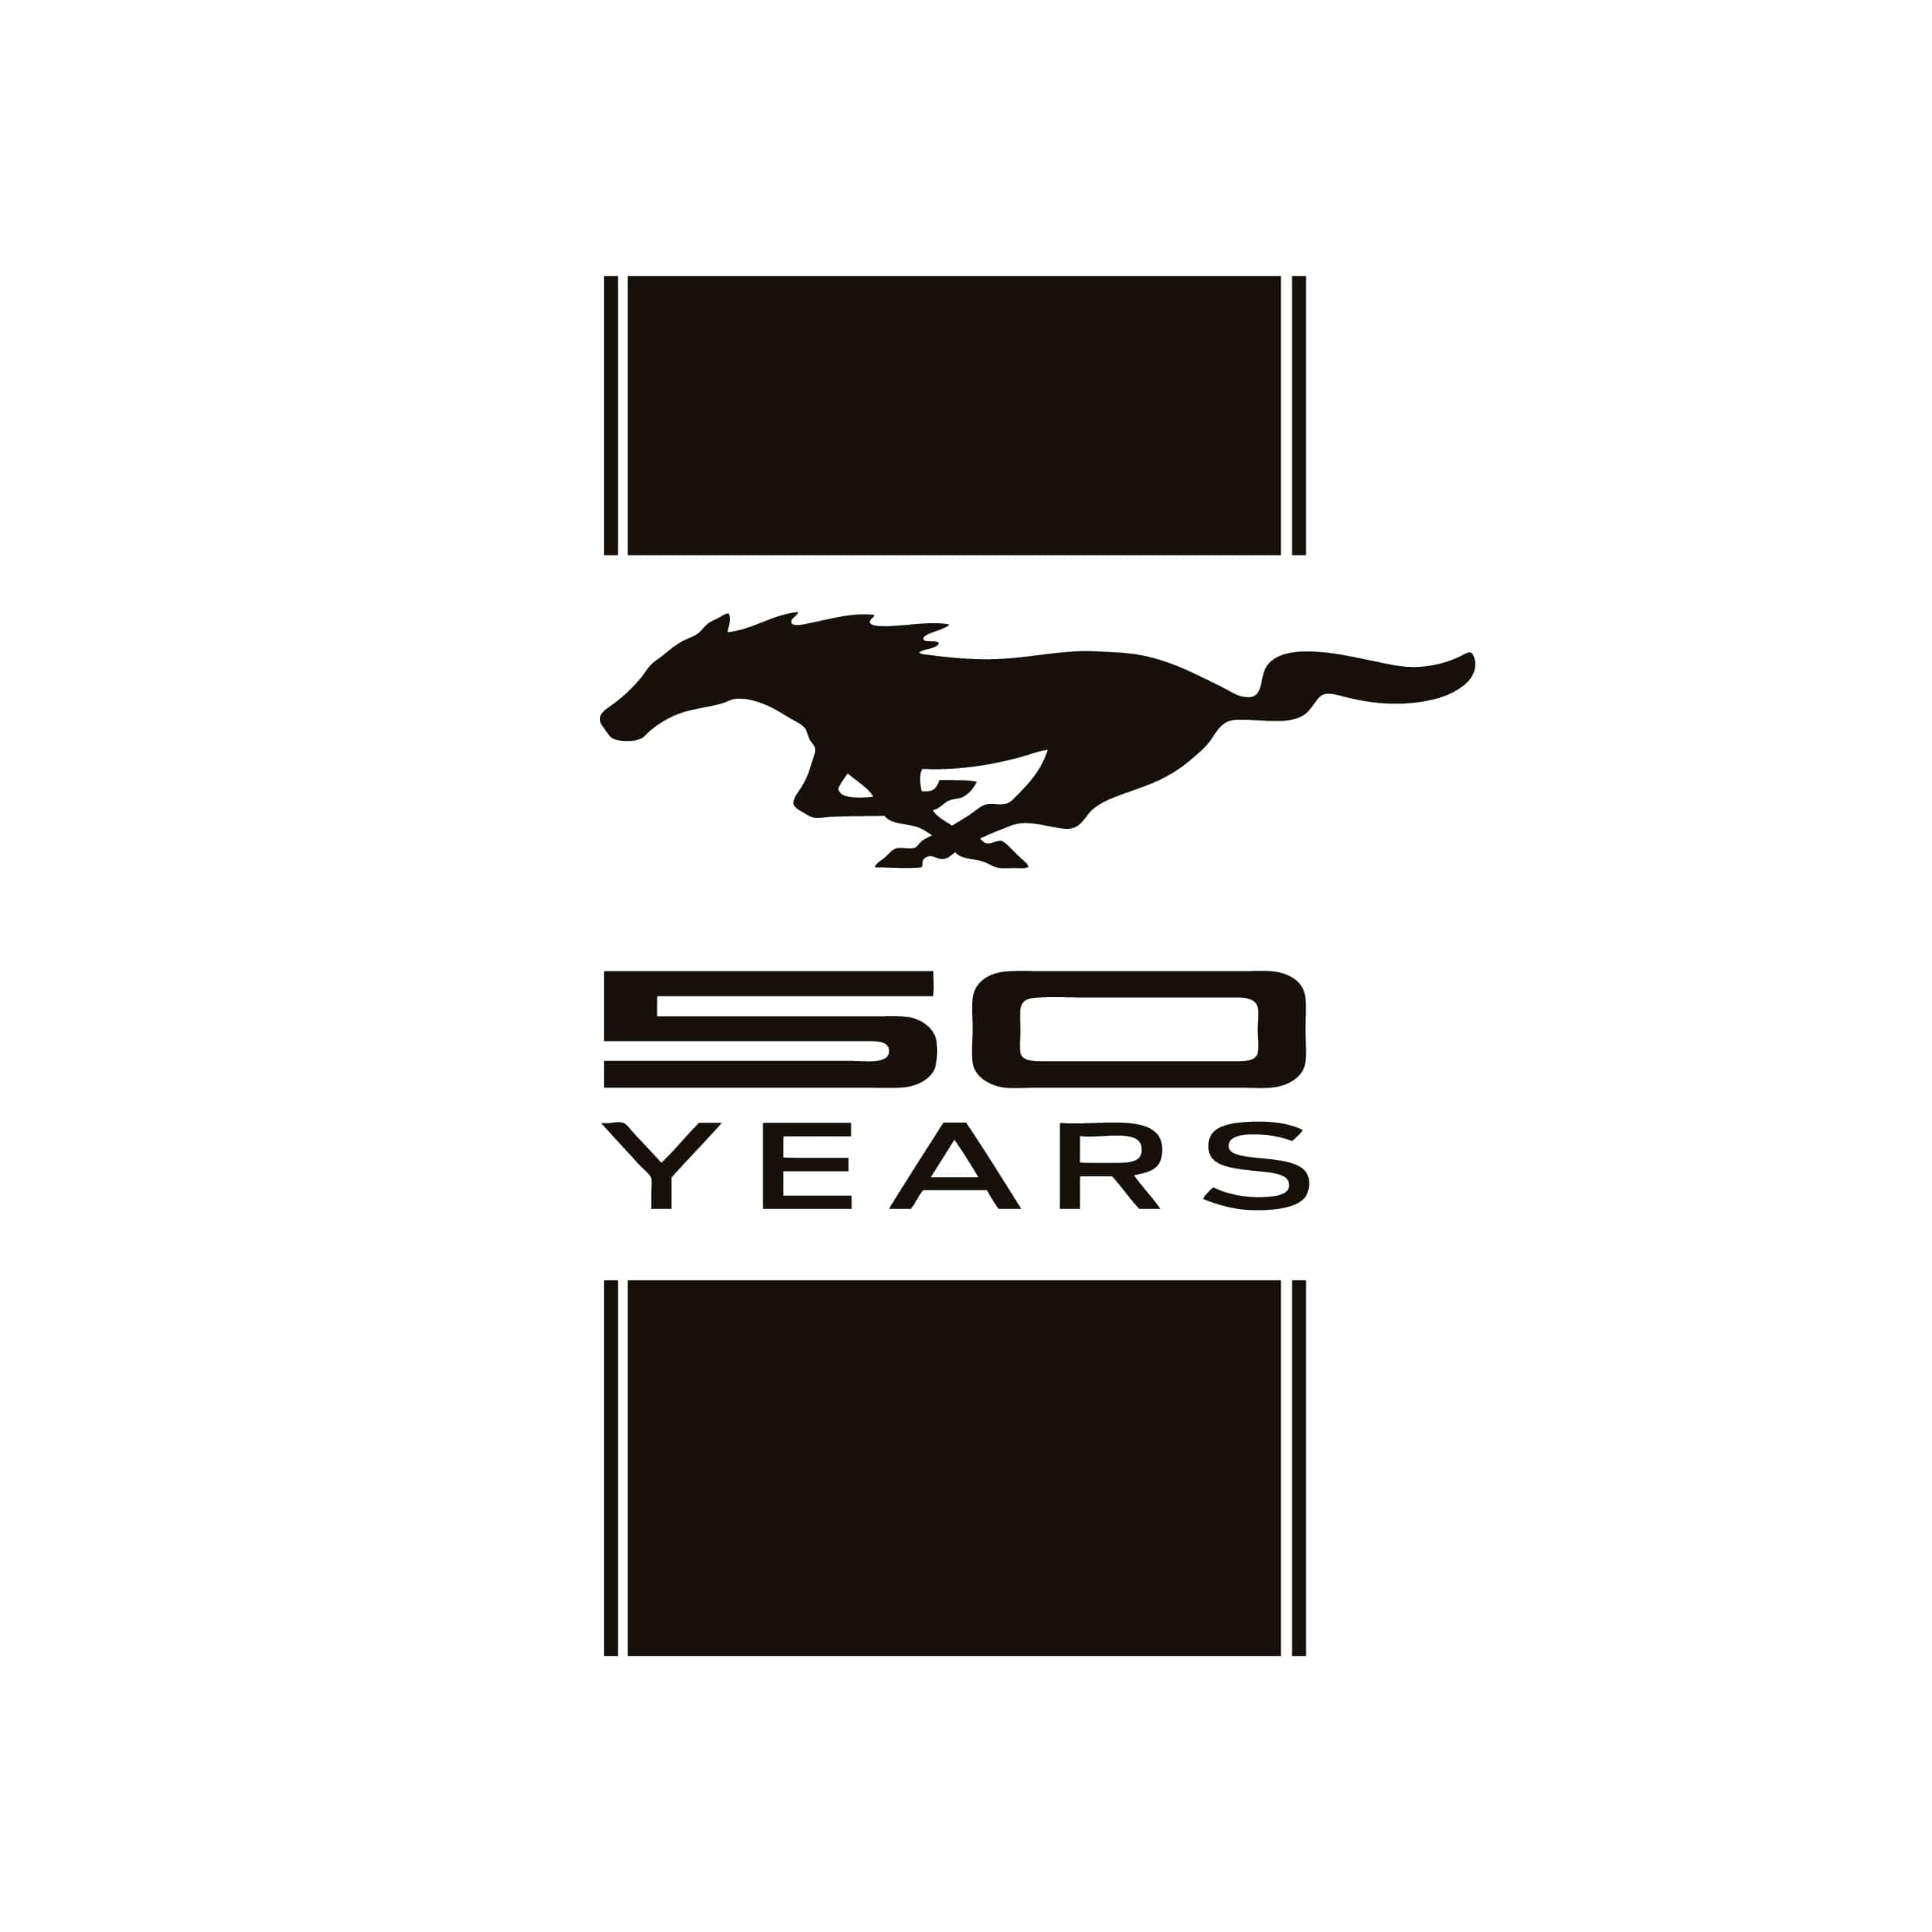 stickers-mustang-50-years-ref17-ford-autocollant-voiture-sticker-auto-autocollants-decals-sponsors-racing-tuning-sport-logo-min